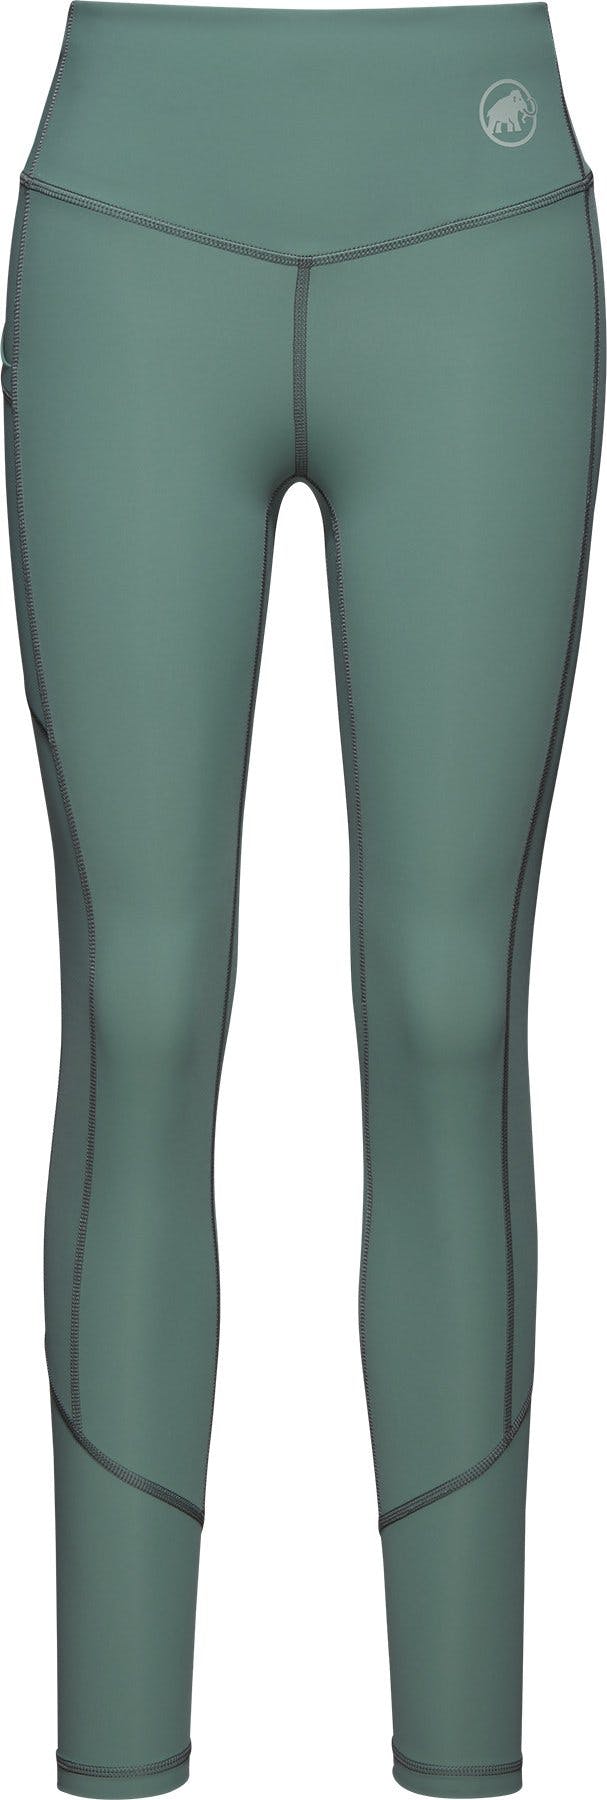 Product image for Massone Tights - Women's